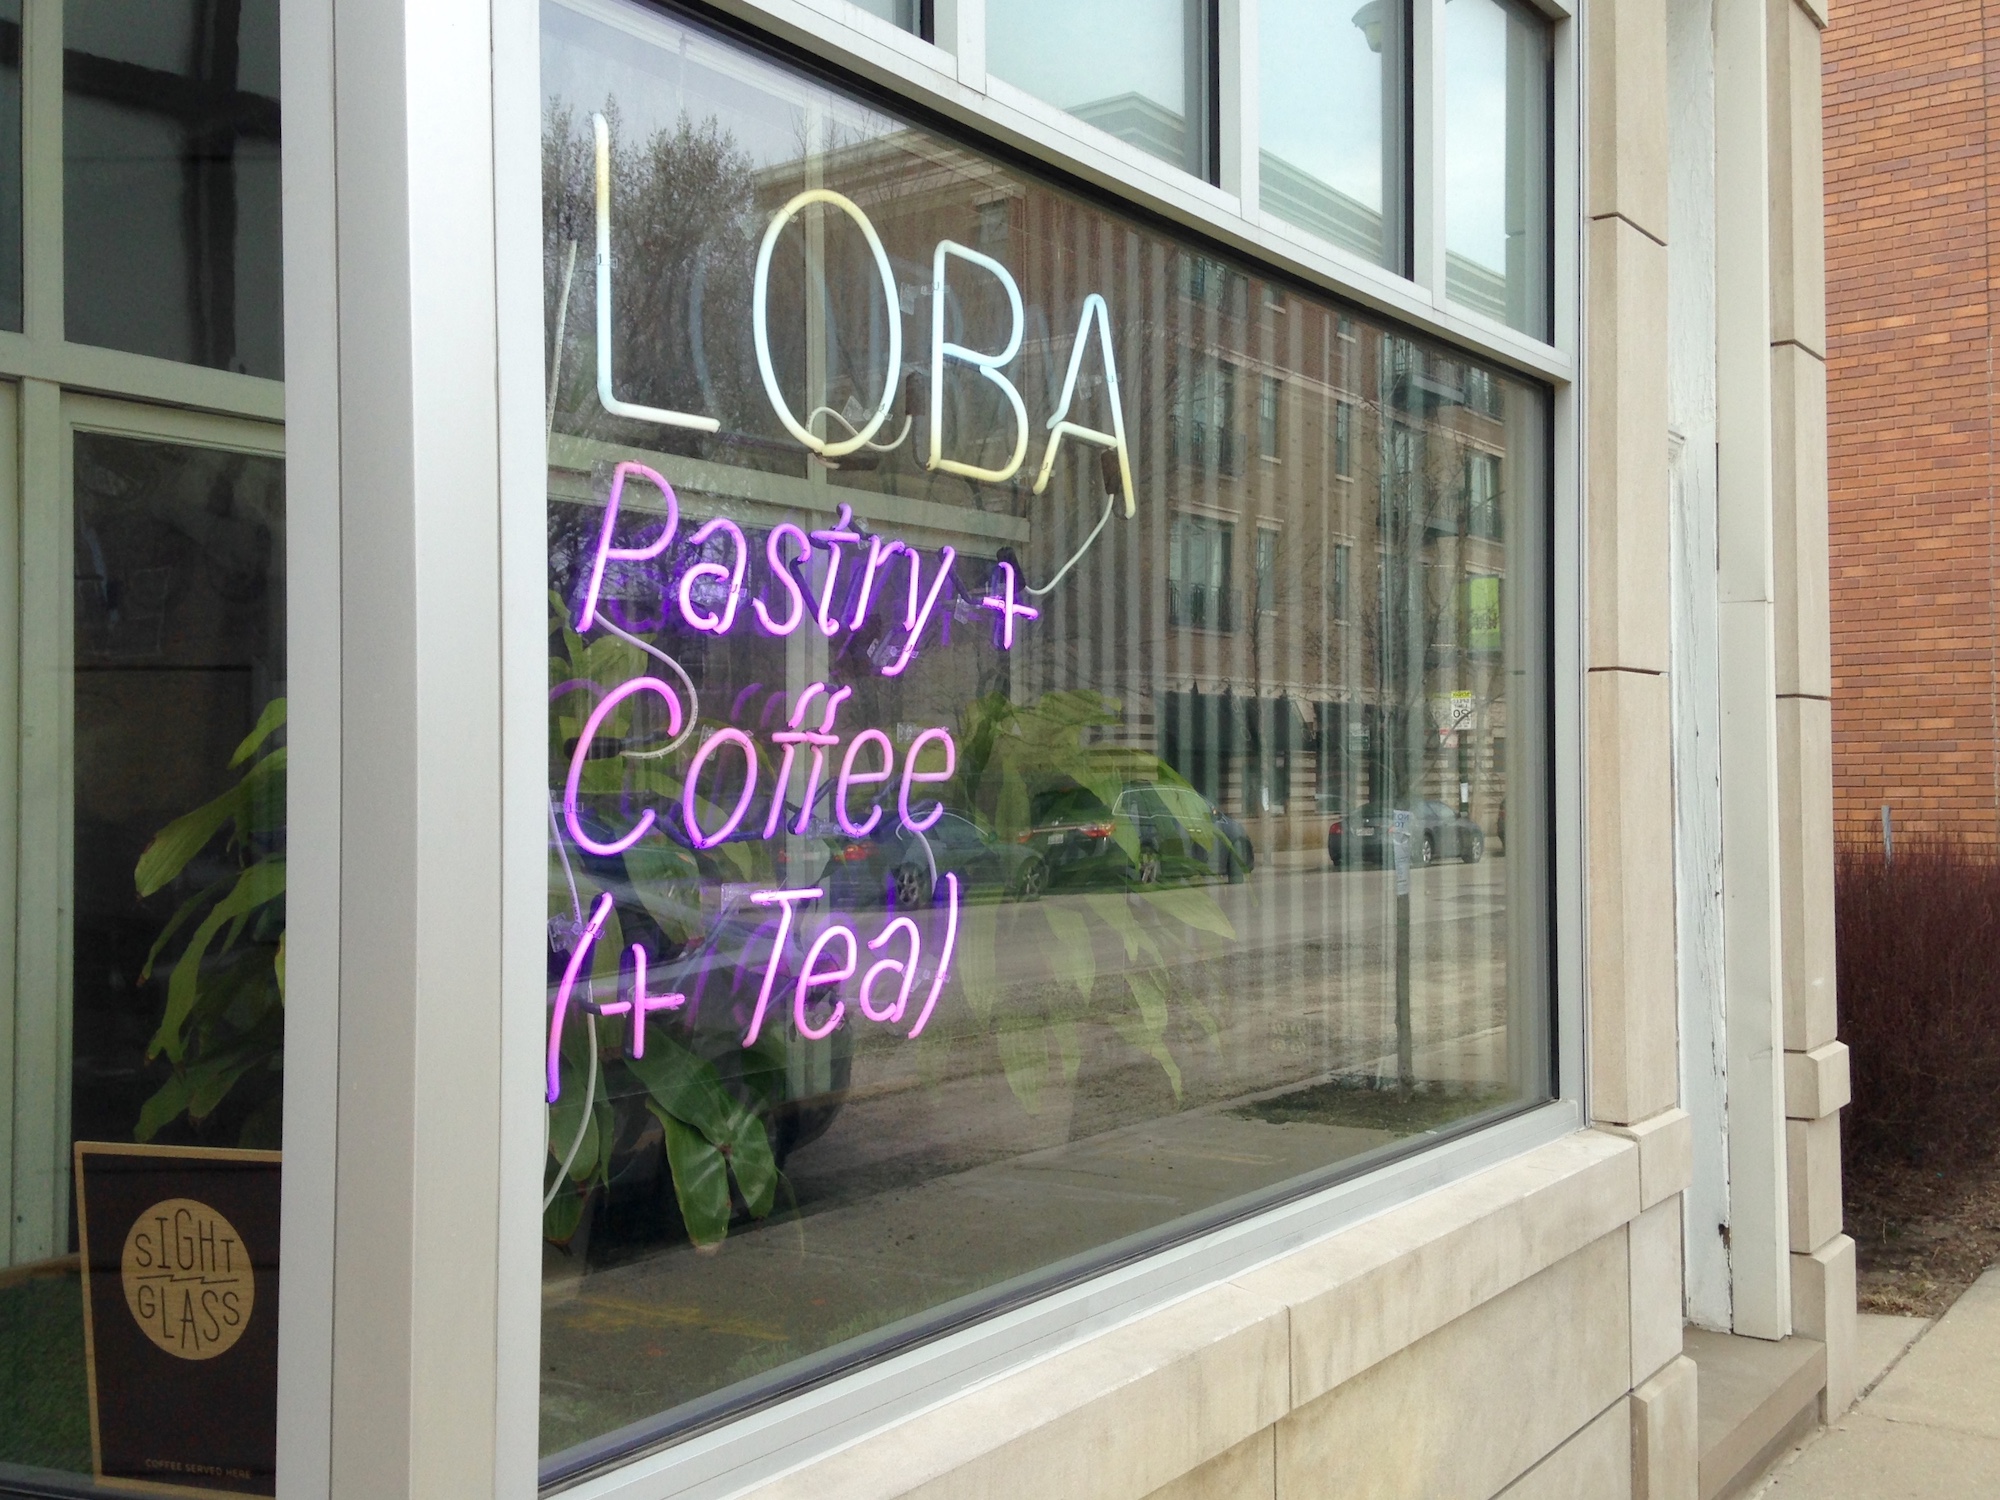 a coffee shop window with neon sign reading “Loba”